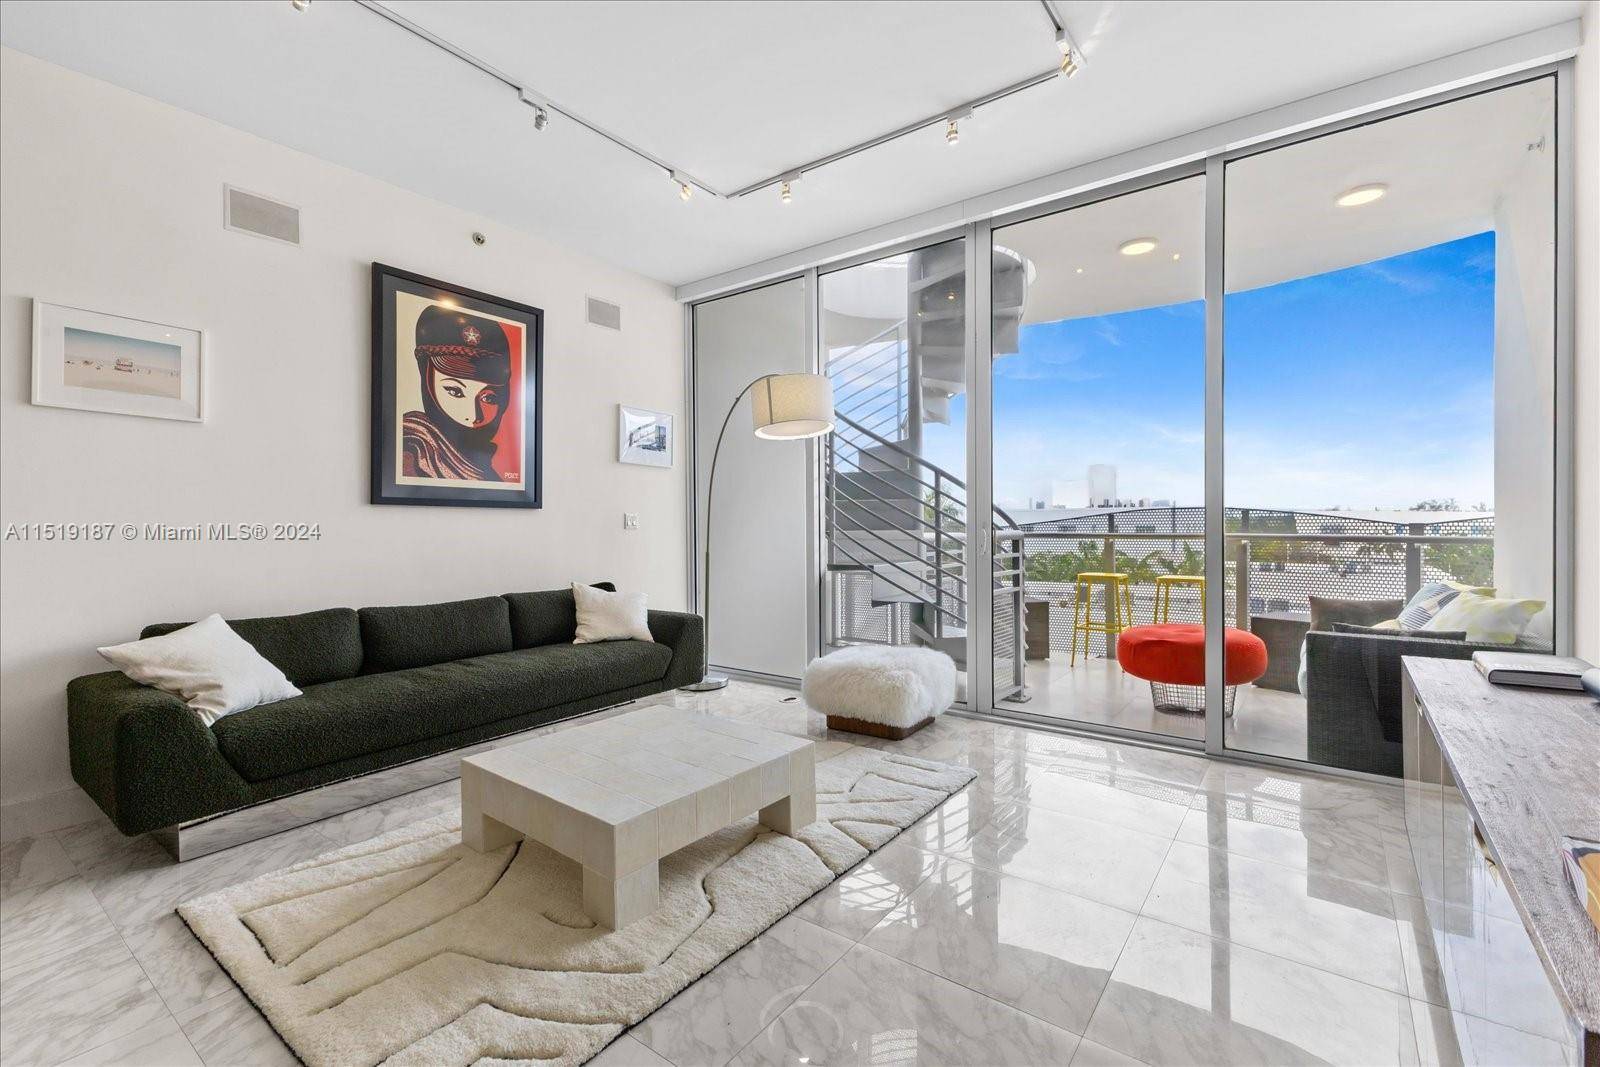 Huge rooftop lanai terrace above this comfortable 2 bedroom 2 bath penthouse situated on the 5th floor of Artepark condominium, boutique luxury building in South Beach located 2 blocks to ...